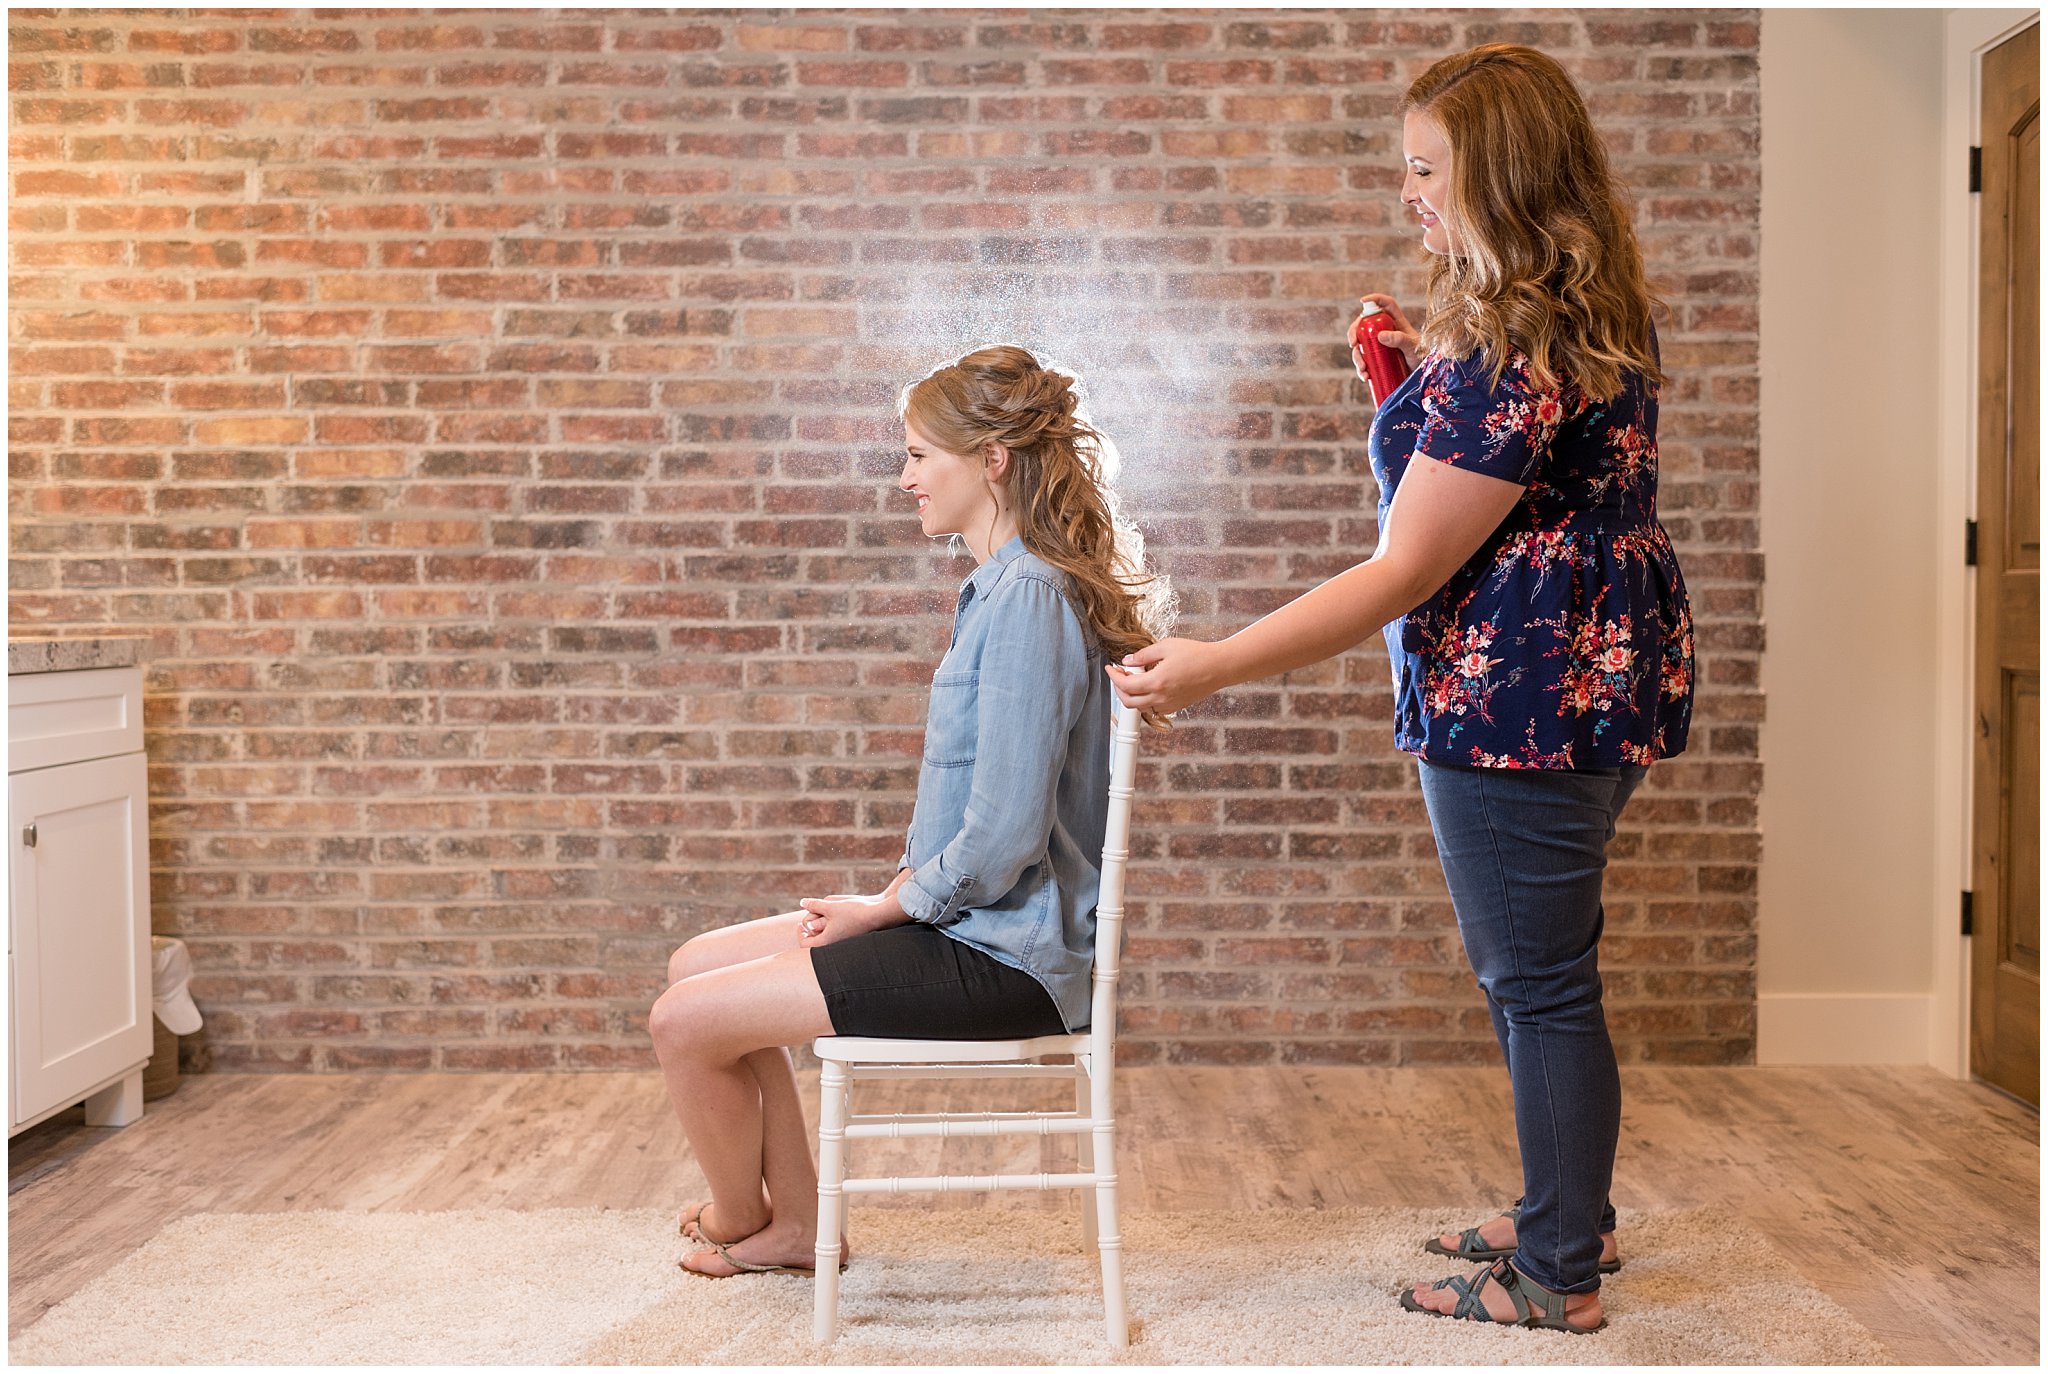 Hailey doing fun hairspray shot at Talia Event Center | Why Hire a professional hair and makeup artist | Jessie and Dallin Photography